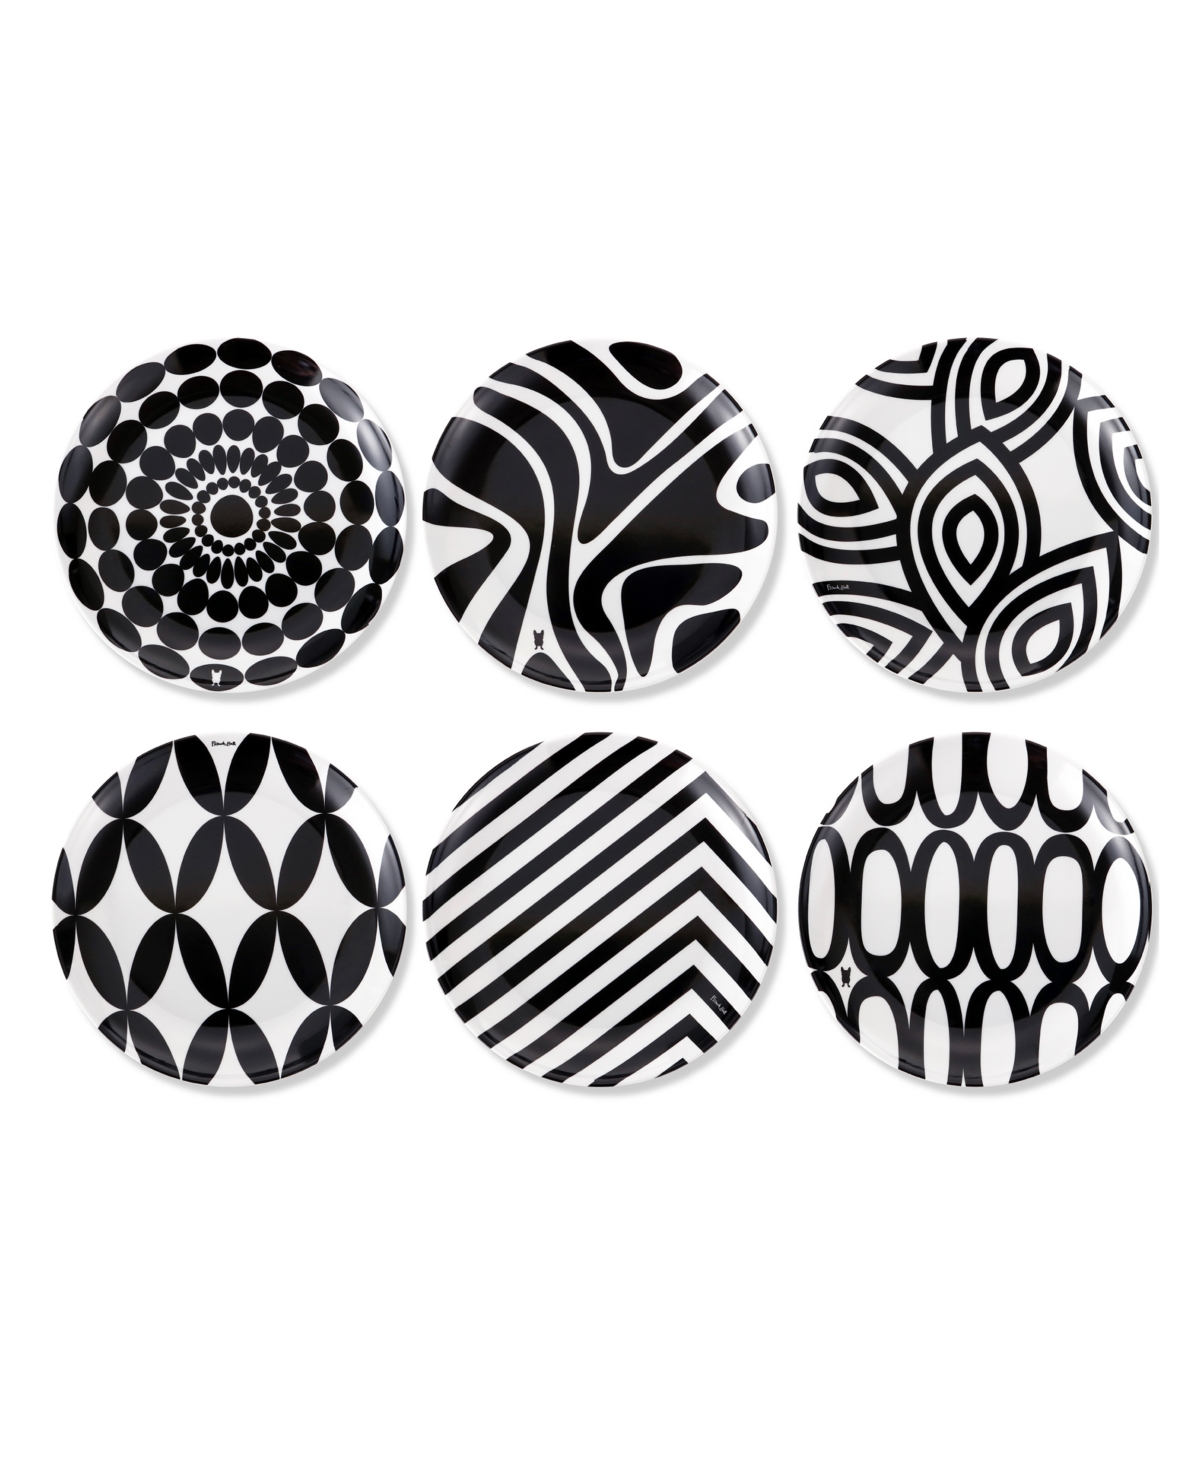 Solid 6 Piece Assorted Appetizer Plates Set, Service for 6 - Black and White